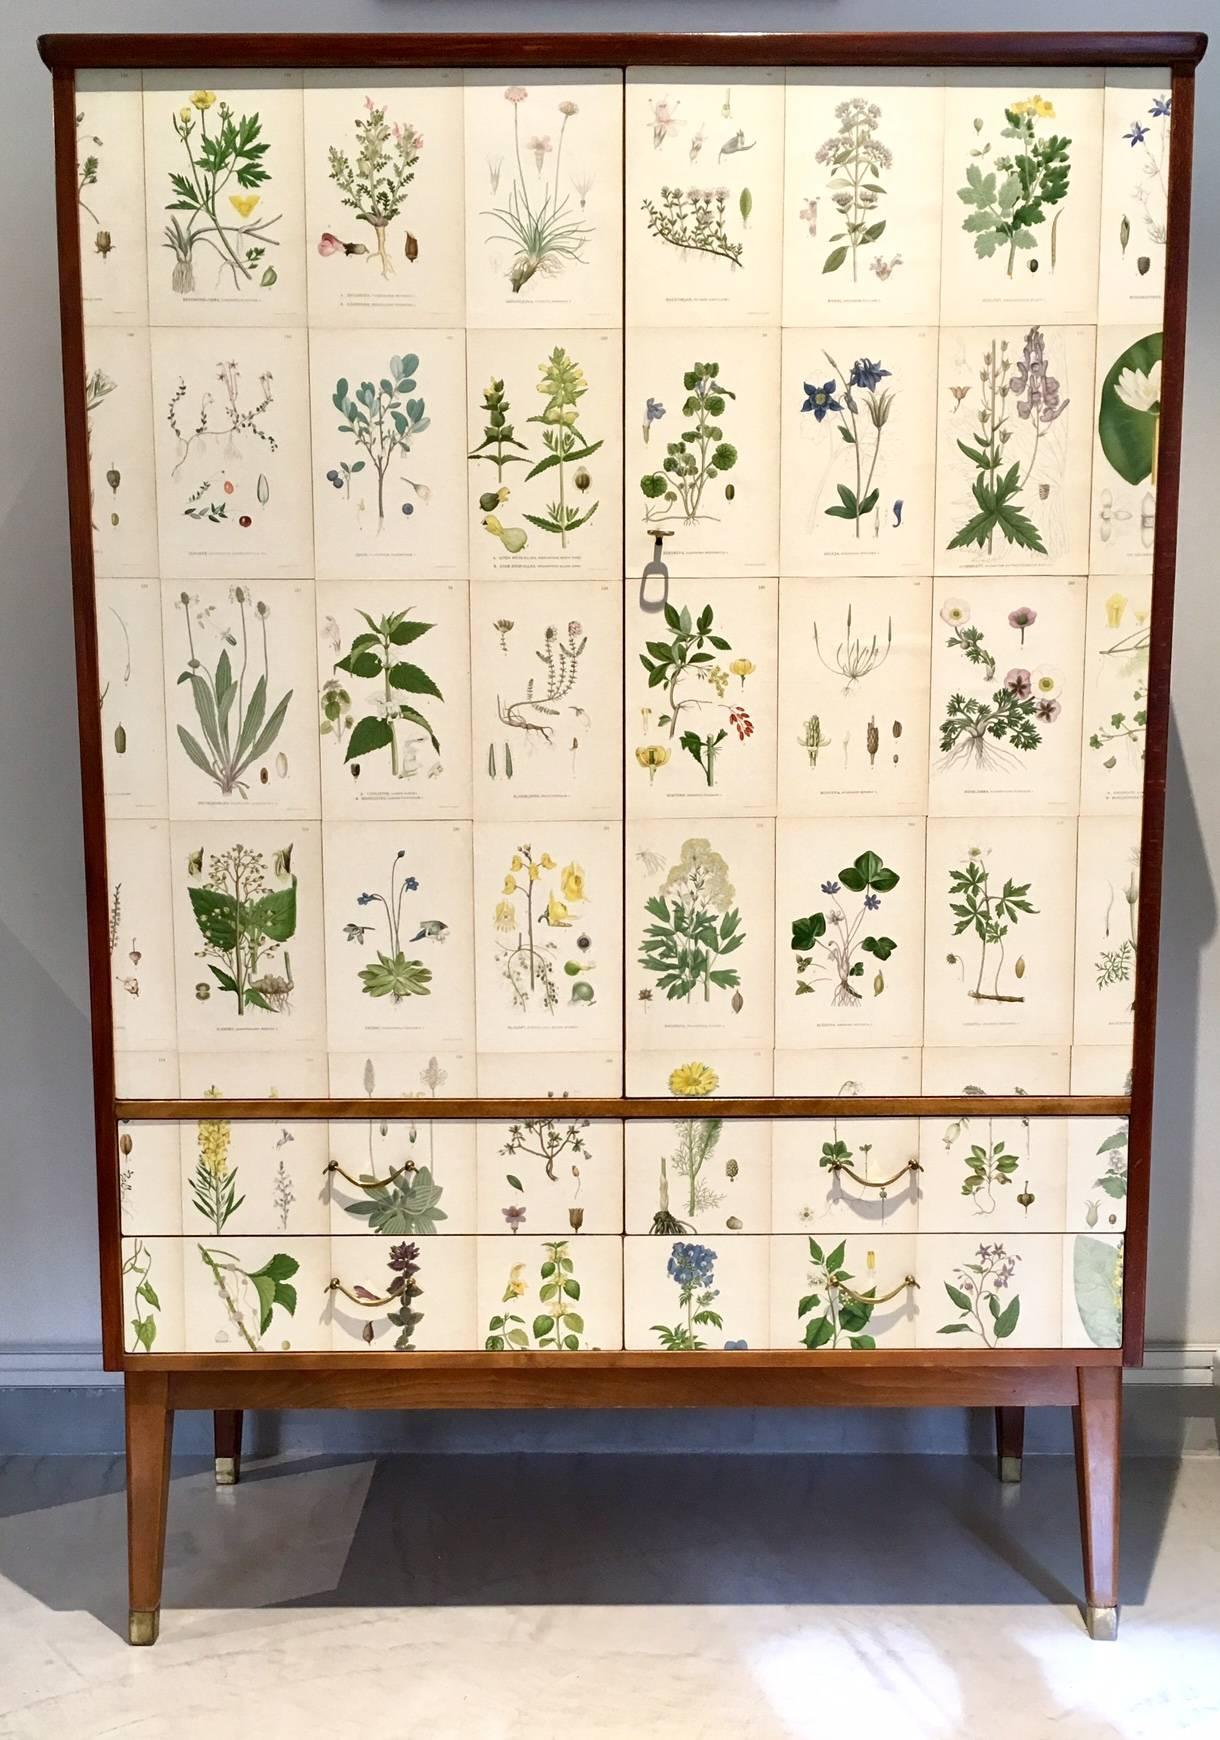 Beautiful wooden cabinet with front decorated with illustrations from the book "Nordens Flora" by Swedish botanist and botanical artist Carl Axel Magnus Lindman (1856-1928). In the style of Josef Frank. Interior lined with shelves, four